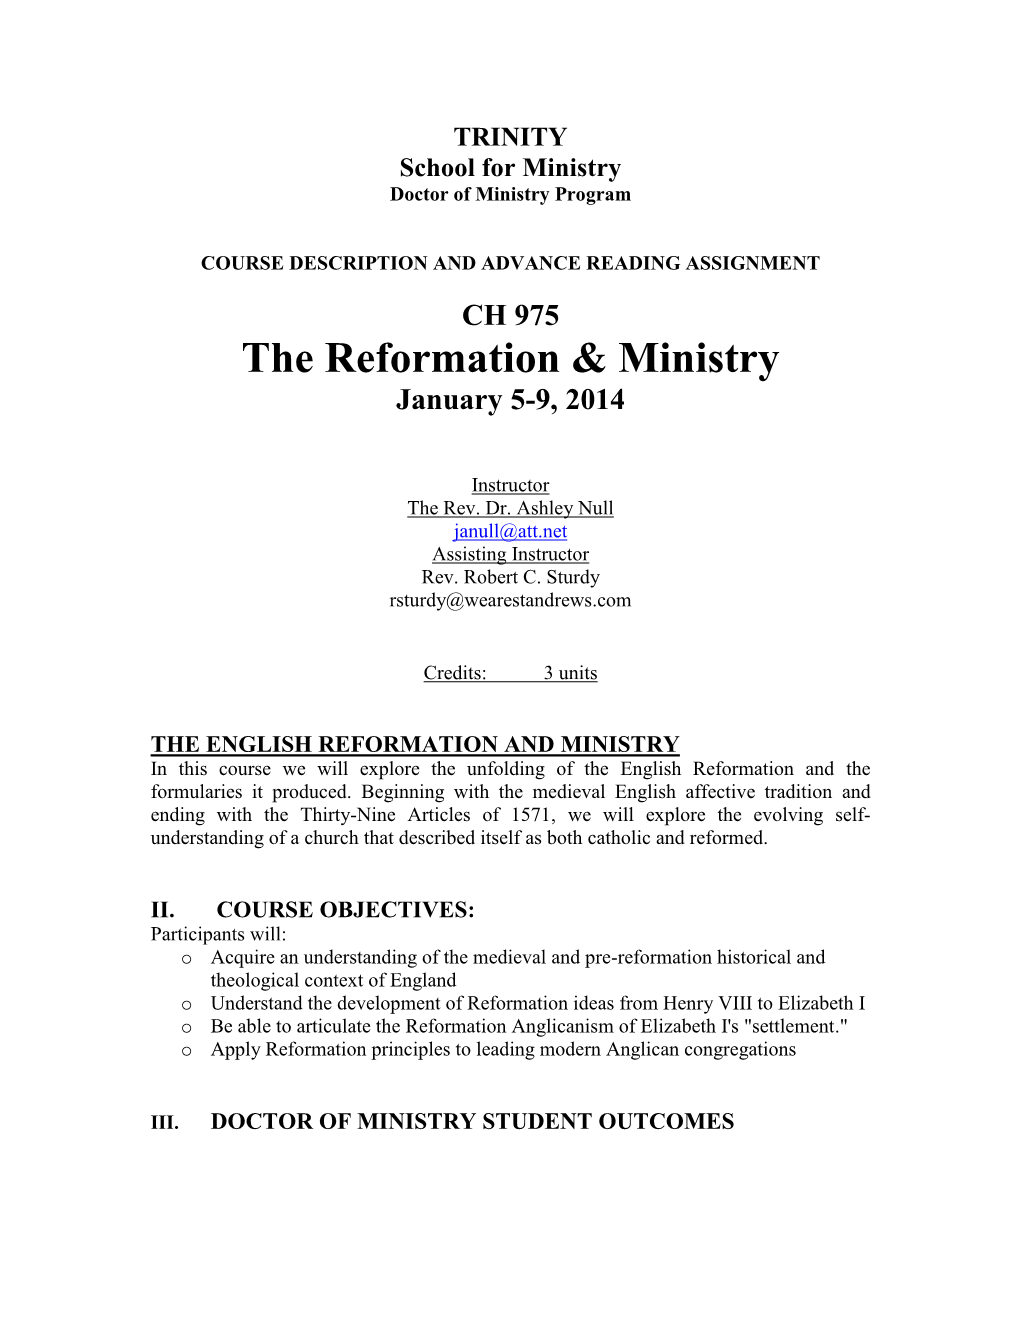 The Reformation & Ministry